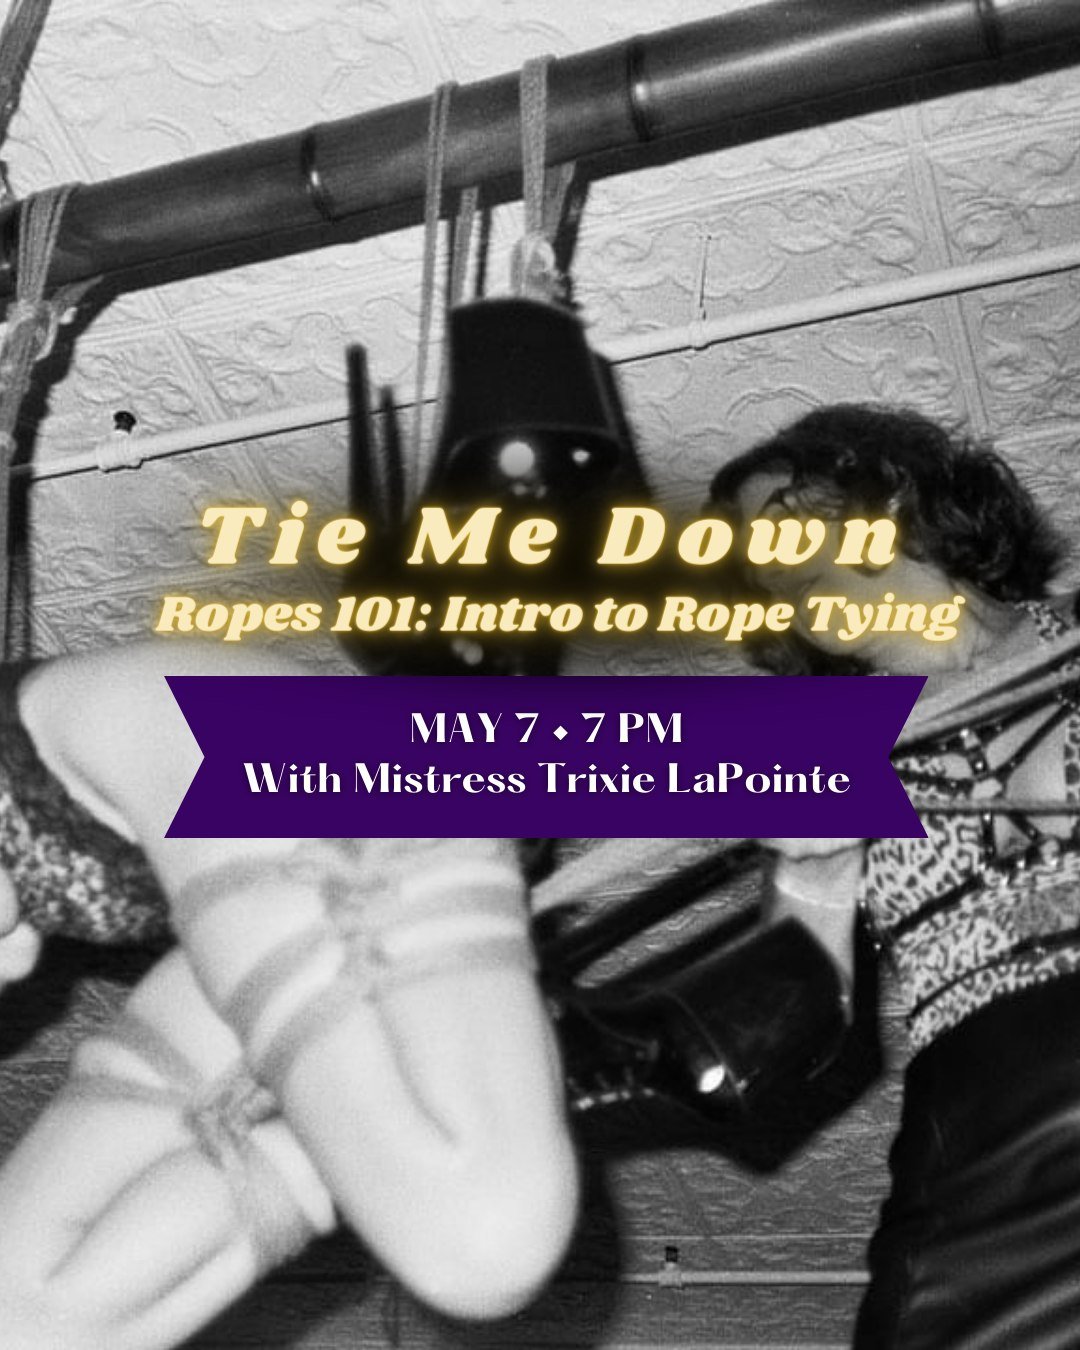 Welcome to the world of rope! @trixielapointe will lead you through all you need to get rolling on your rope journey. After an in depth chat about rope safety and precautions, we will dive into getting all bound up. By the end of the night you will k